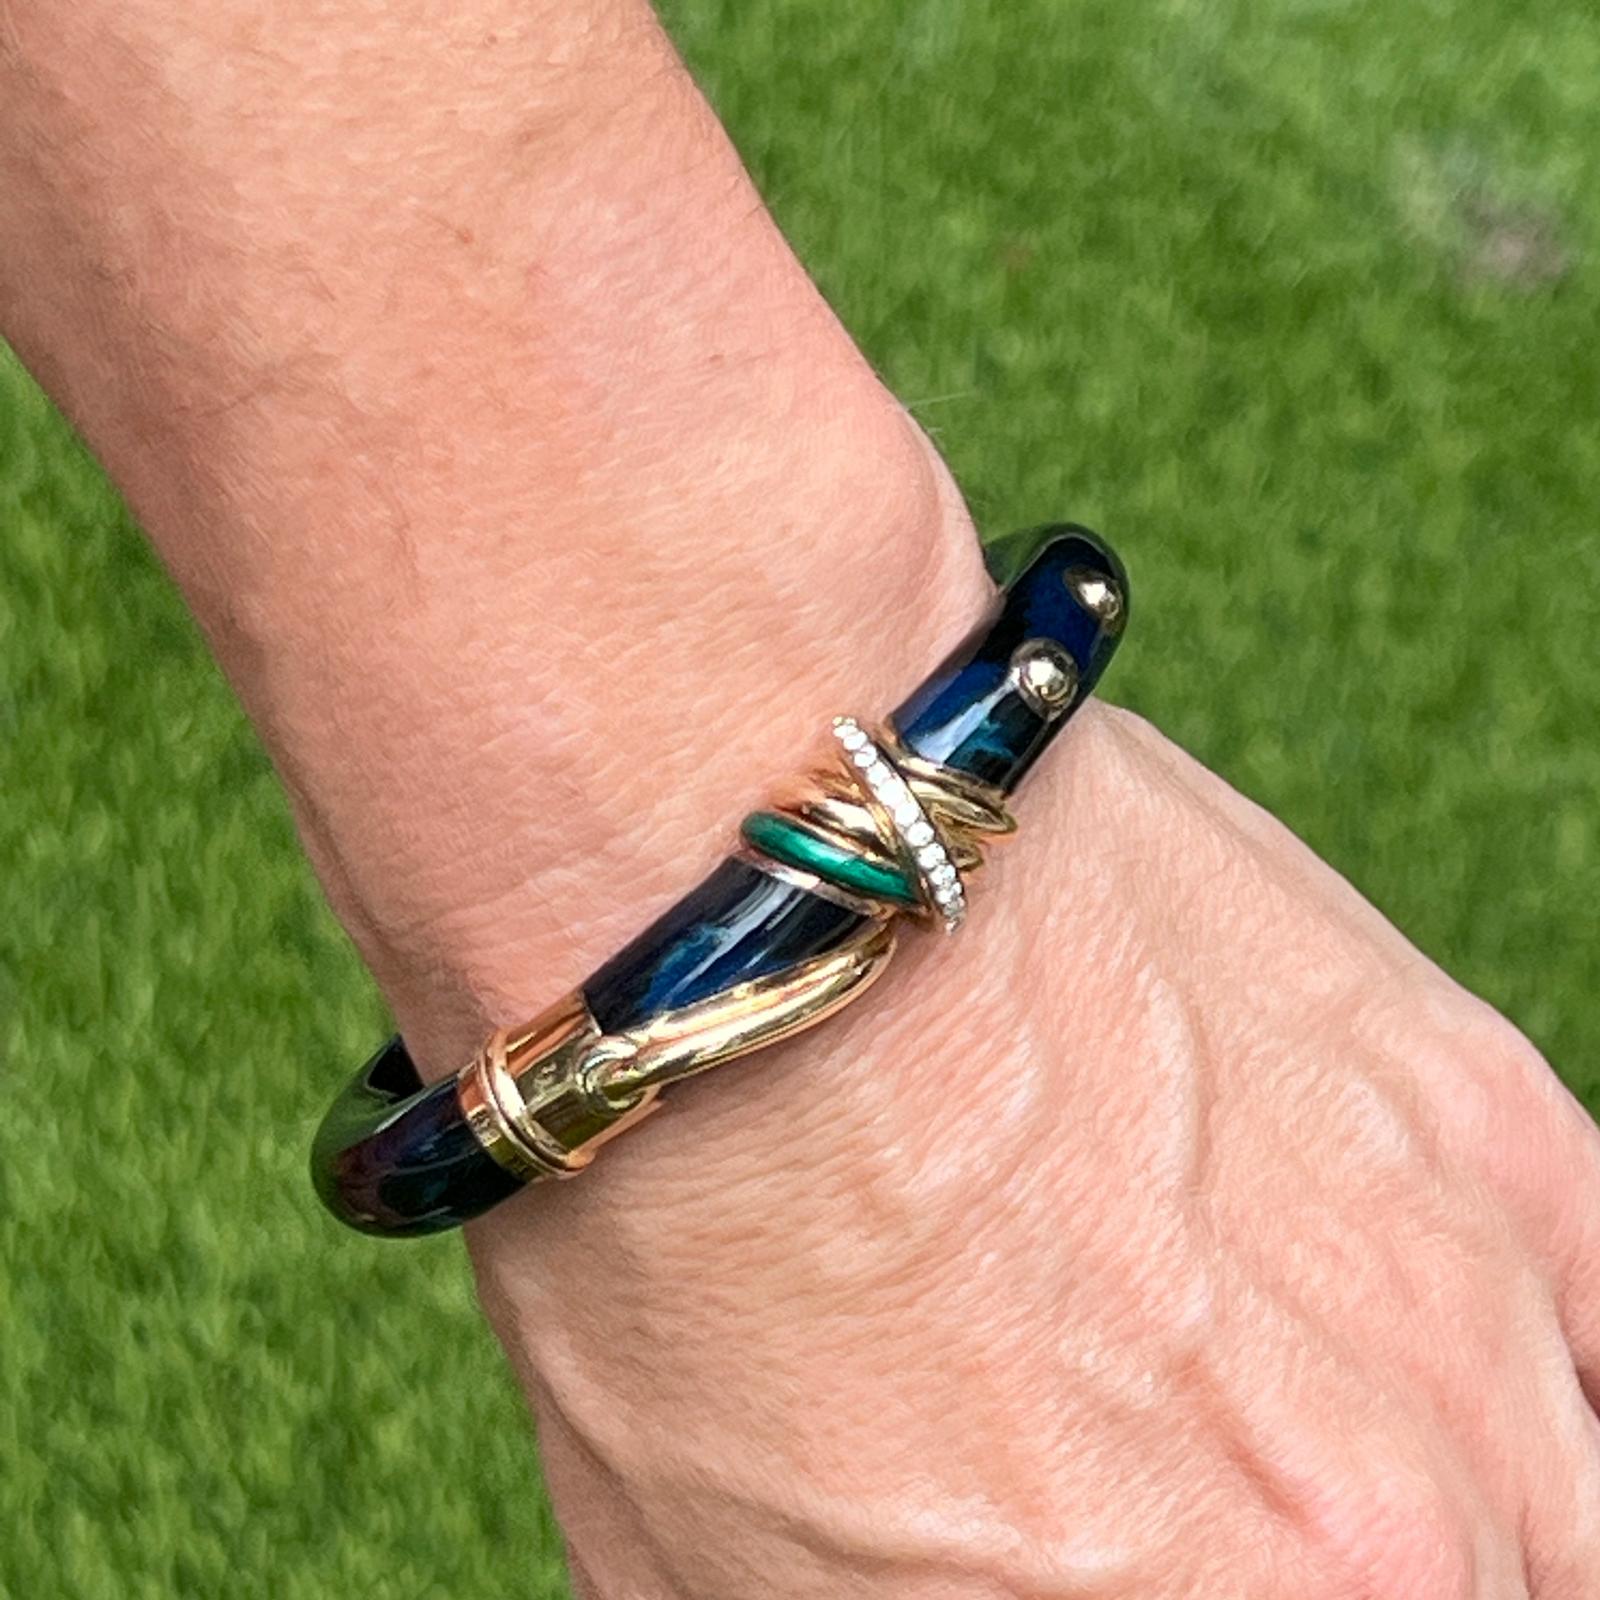 Italian designer La Nouvelle Bague diamond and enamel hinged bangle fashioned in 18 karat yellow gold. The bangle features 13 round brilliant cut diamonds in a row weighing approximately .26 carat total weight. The navy blue and green enamel